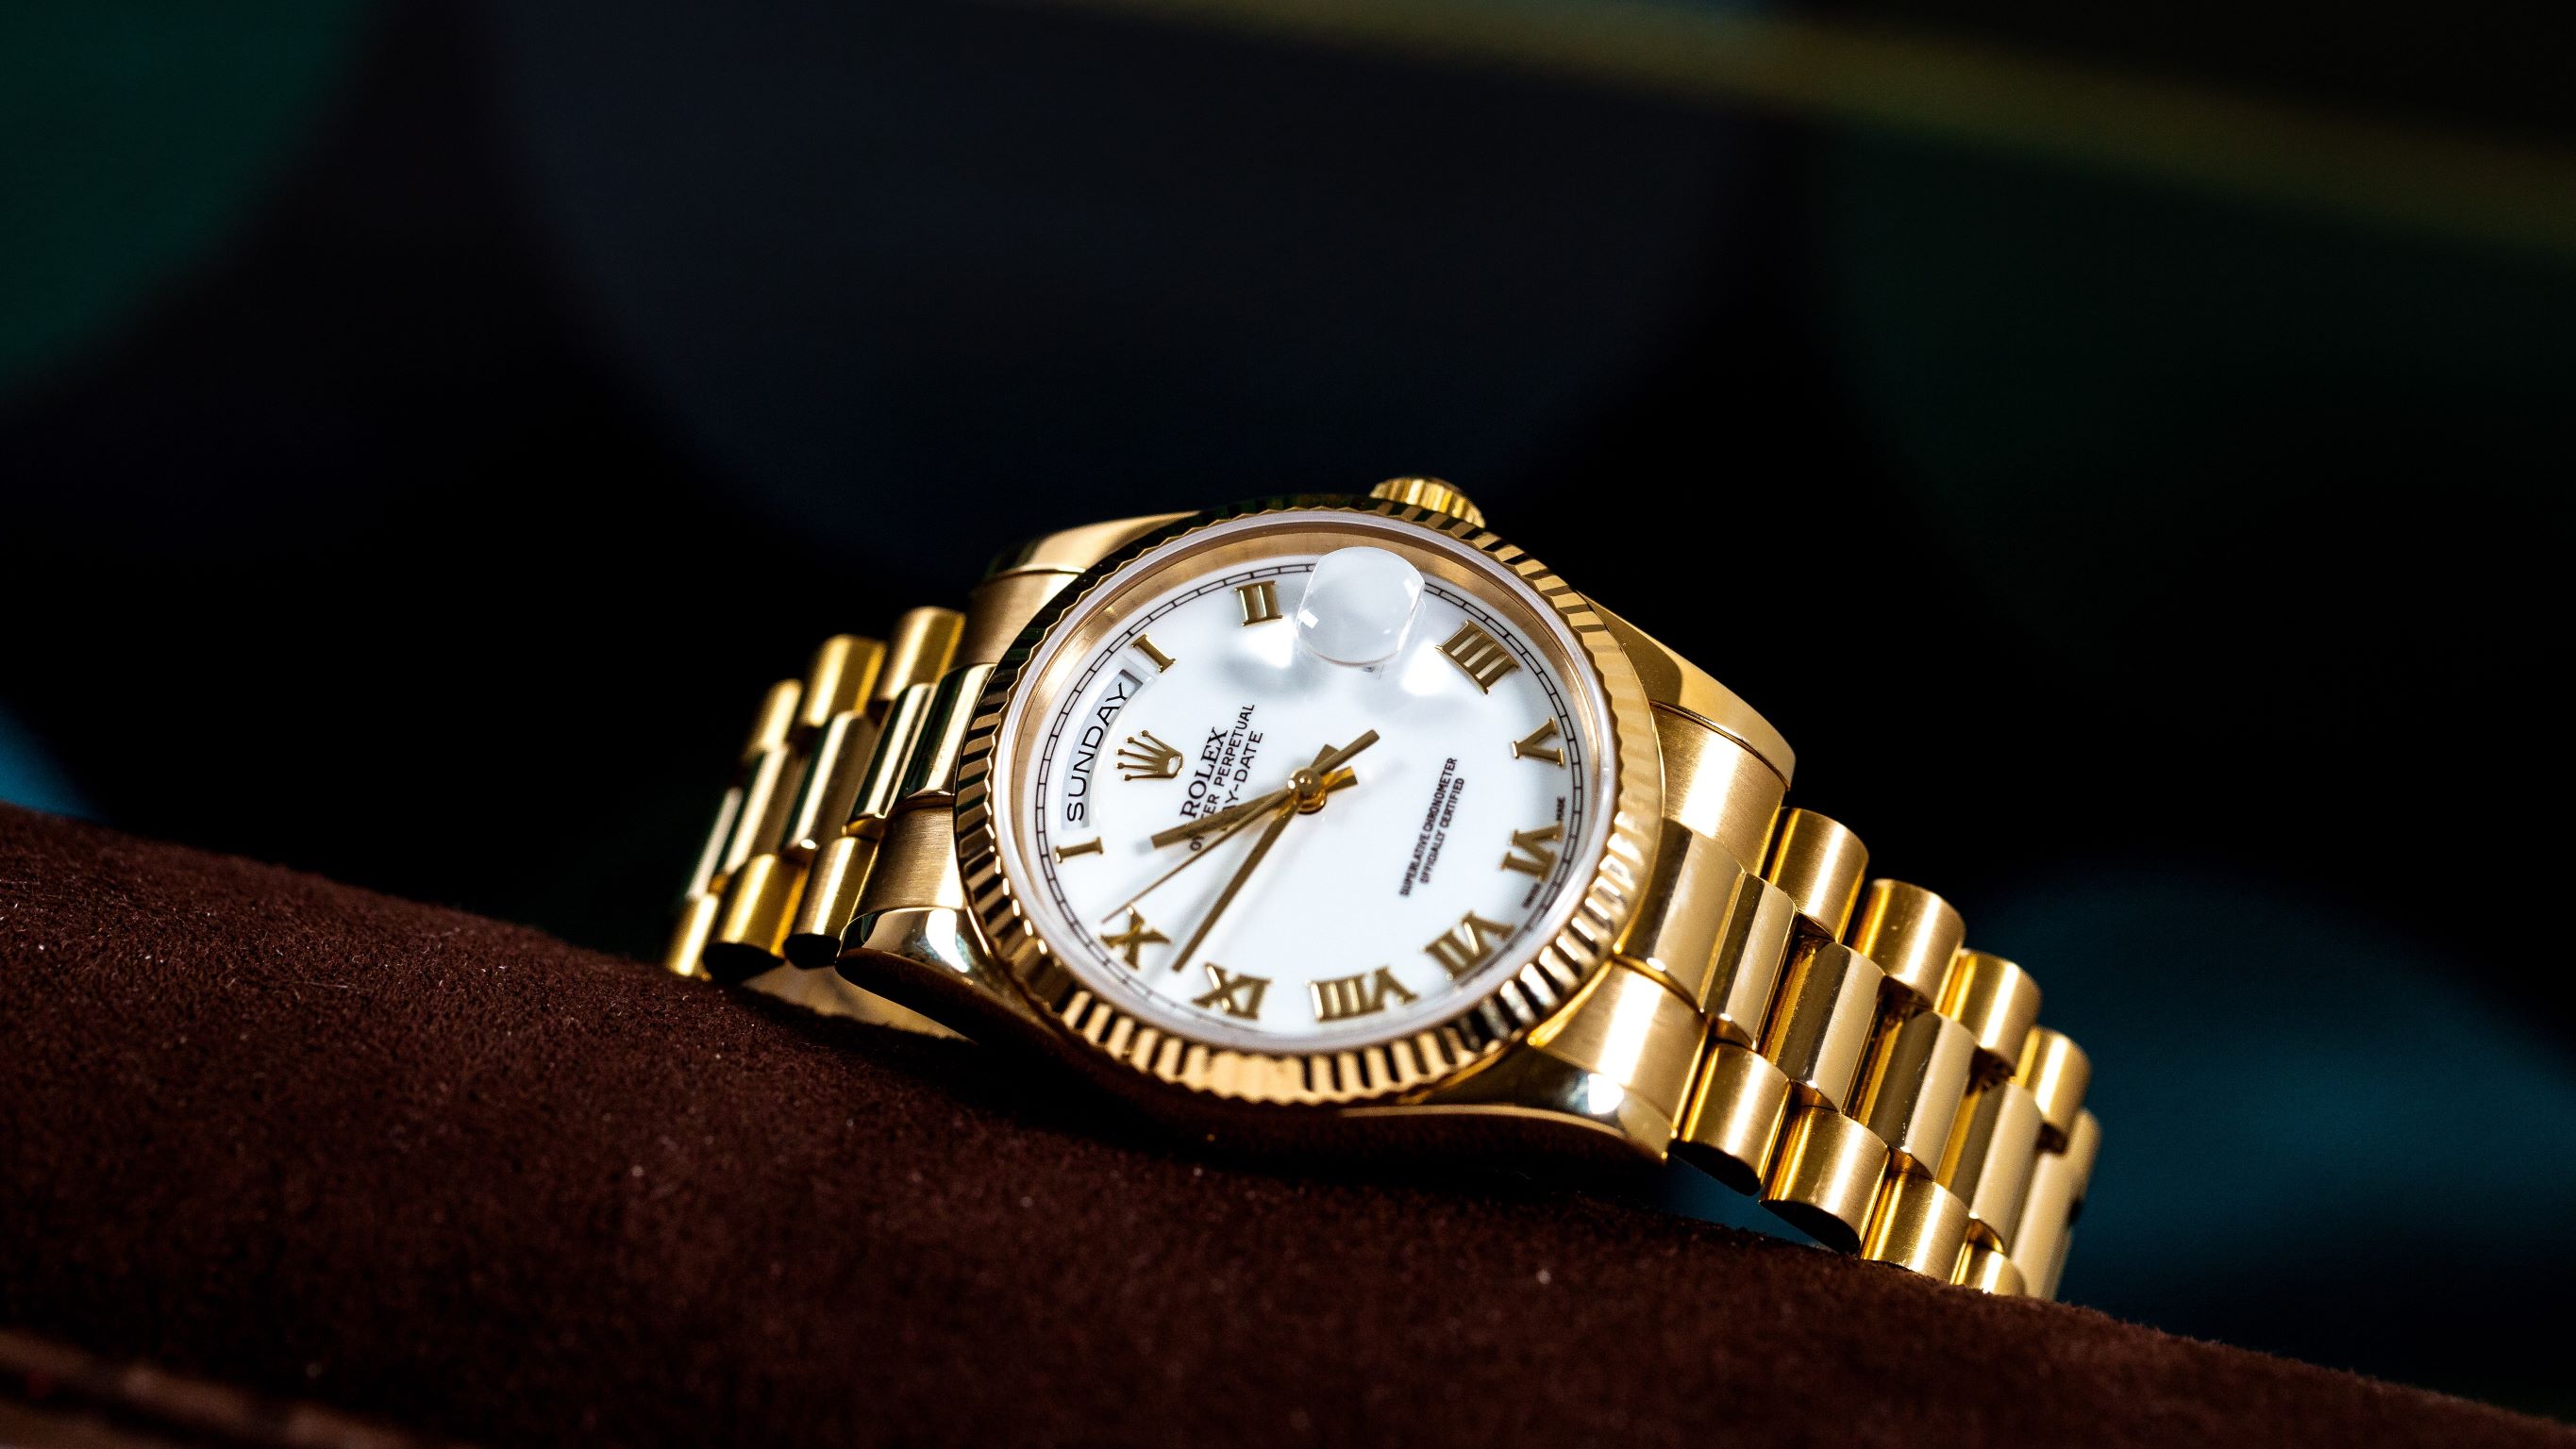 Pre-Owned Picks: A Rolex Day-Date President, The First Omega 'Bond